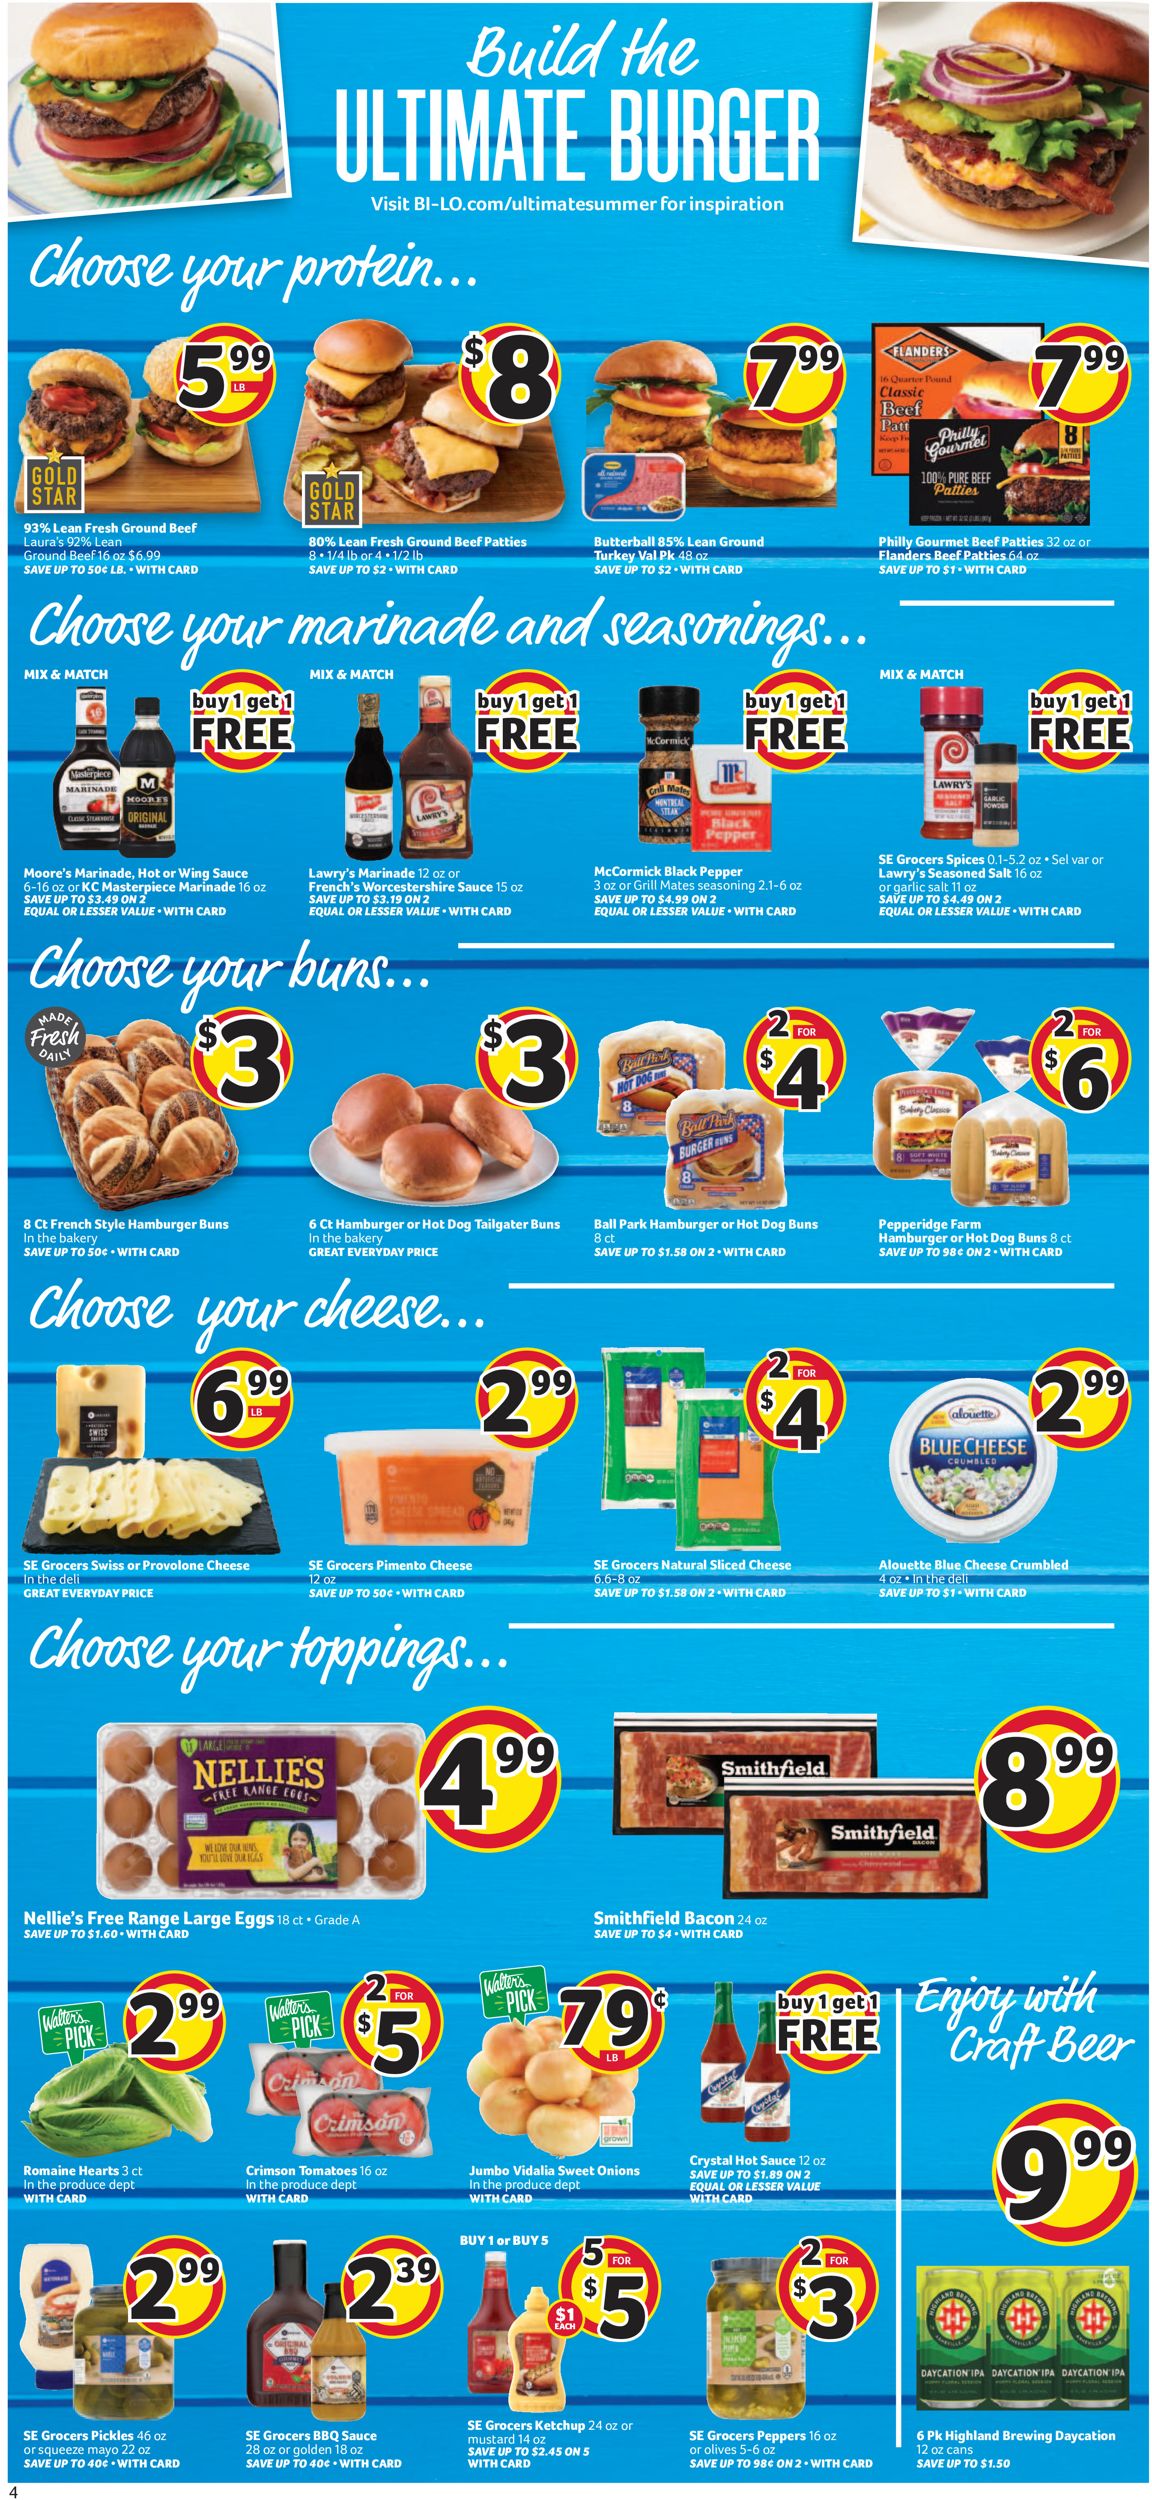 BI-LO Current weekly ad 05/22 - 05/28/2019 5 - frequent ...